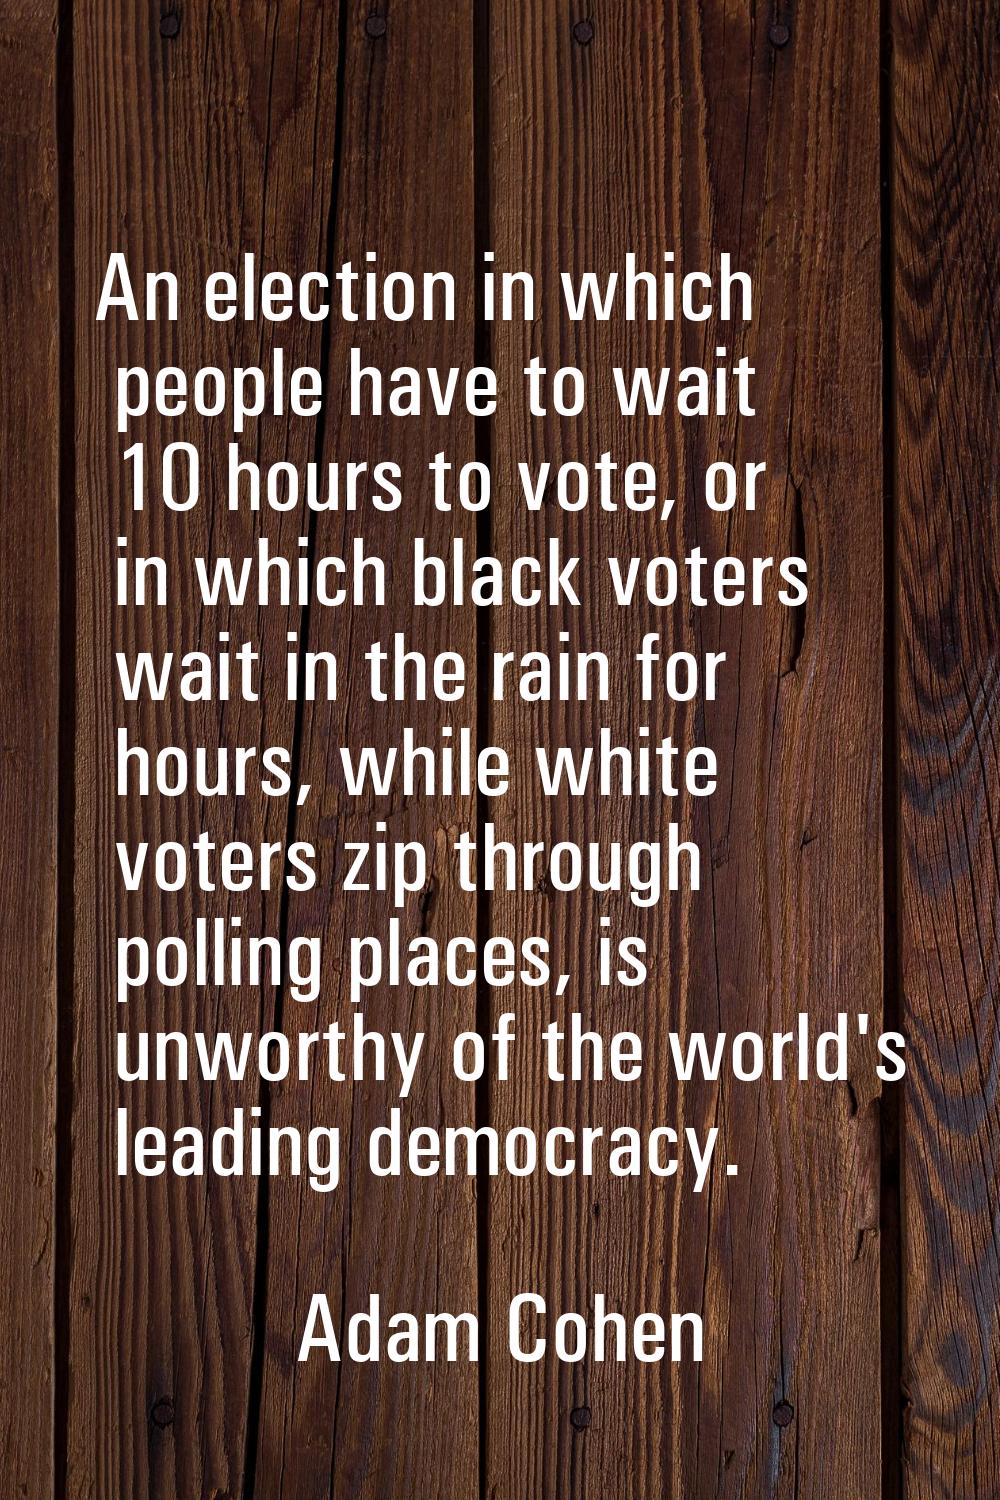 An election in which people have to wait 10 hours to vote, or in which black voters wait in the rai